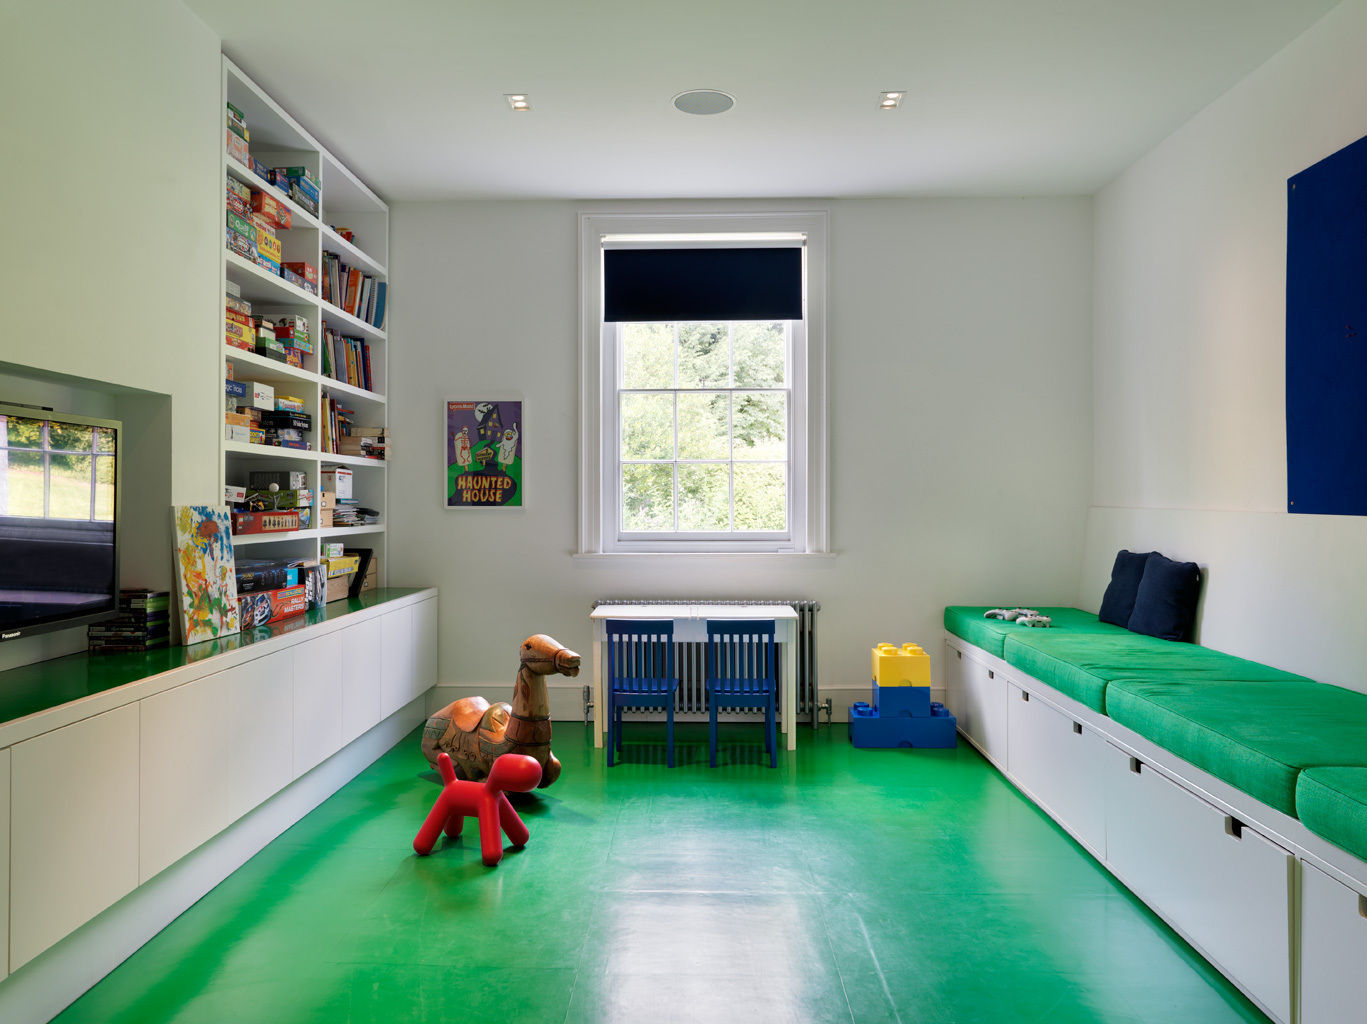 Guildford, Gregory Phillips Architects Gregory Phillips Architects Quarto infantil moderno